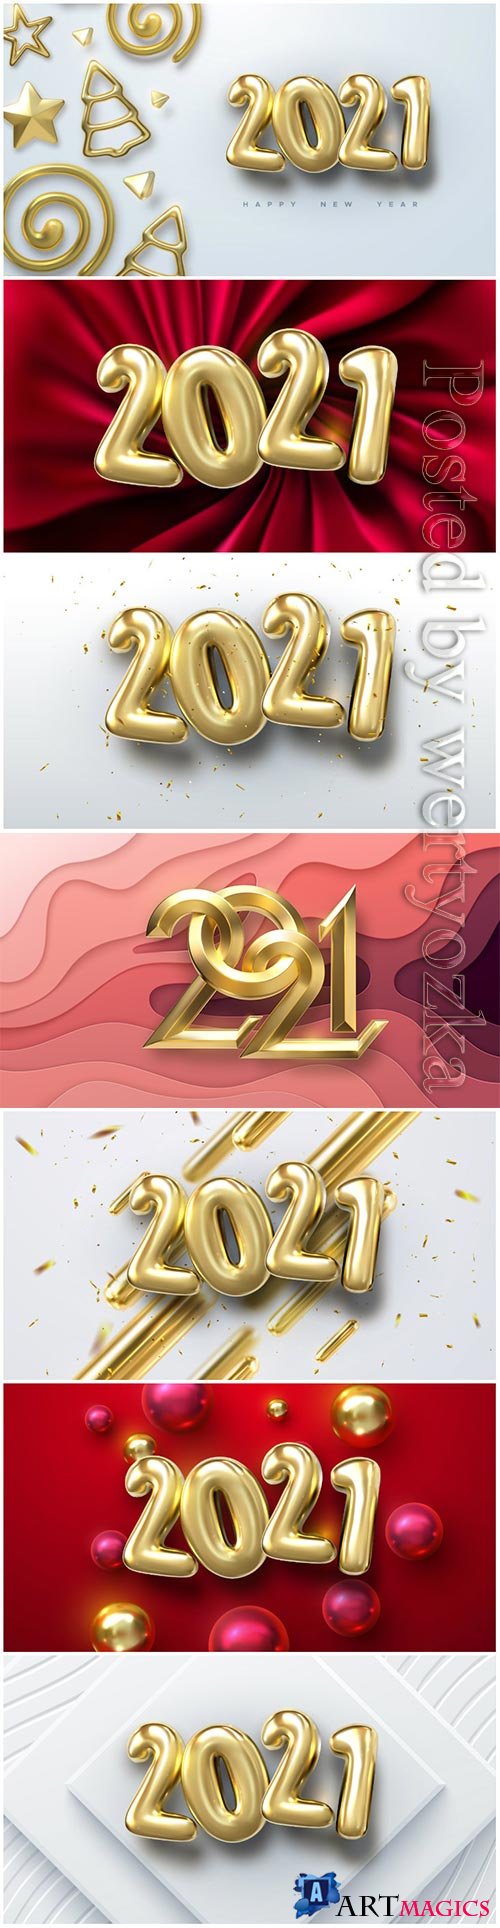 Numbers 2021 for new year vector illustration